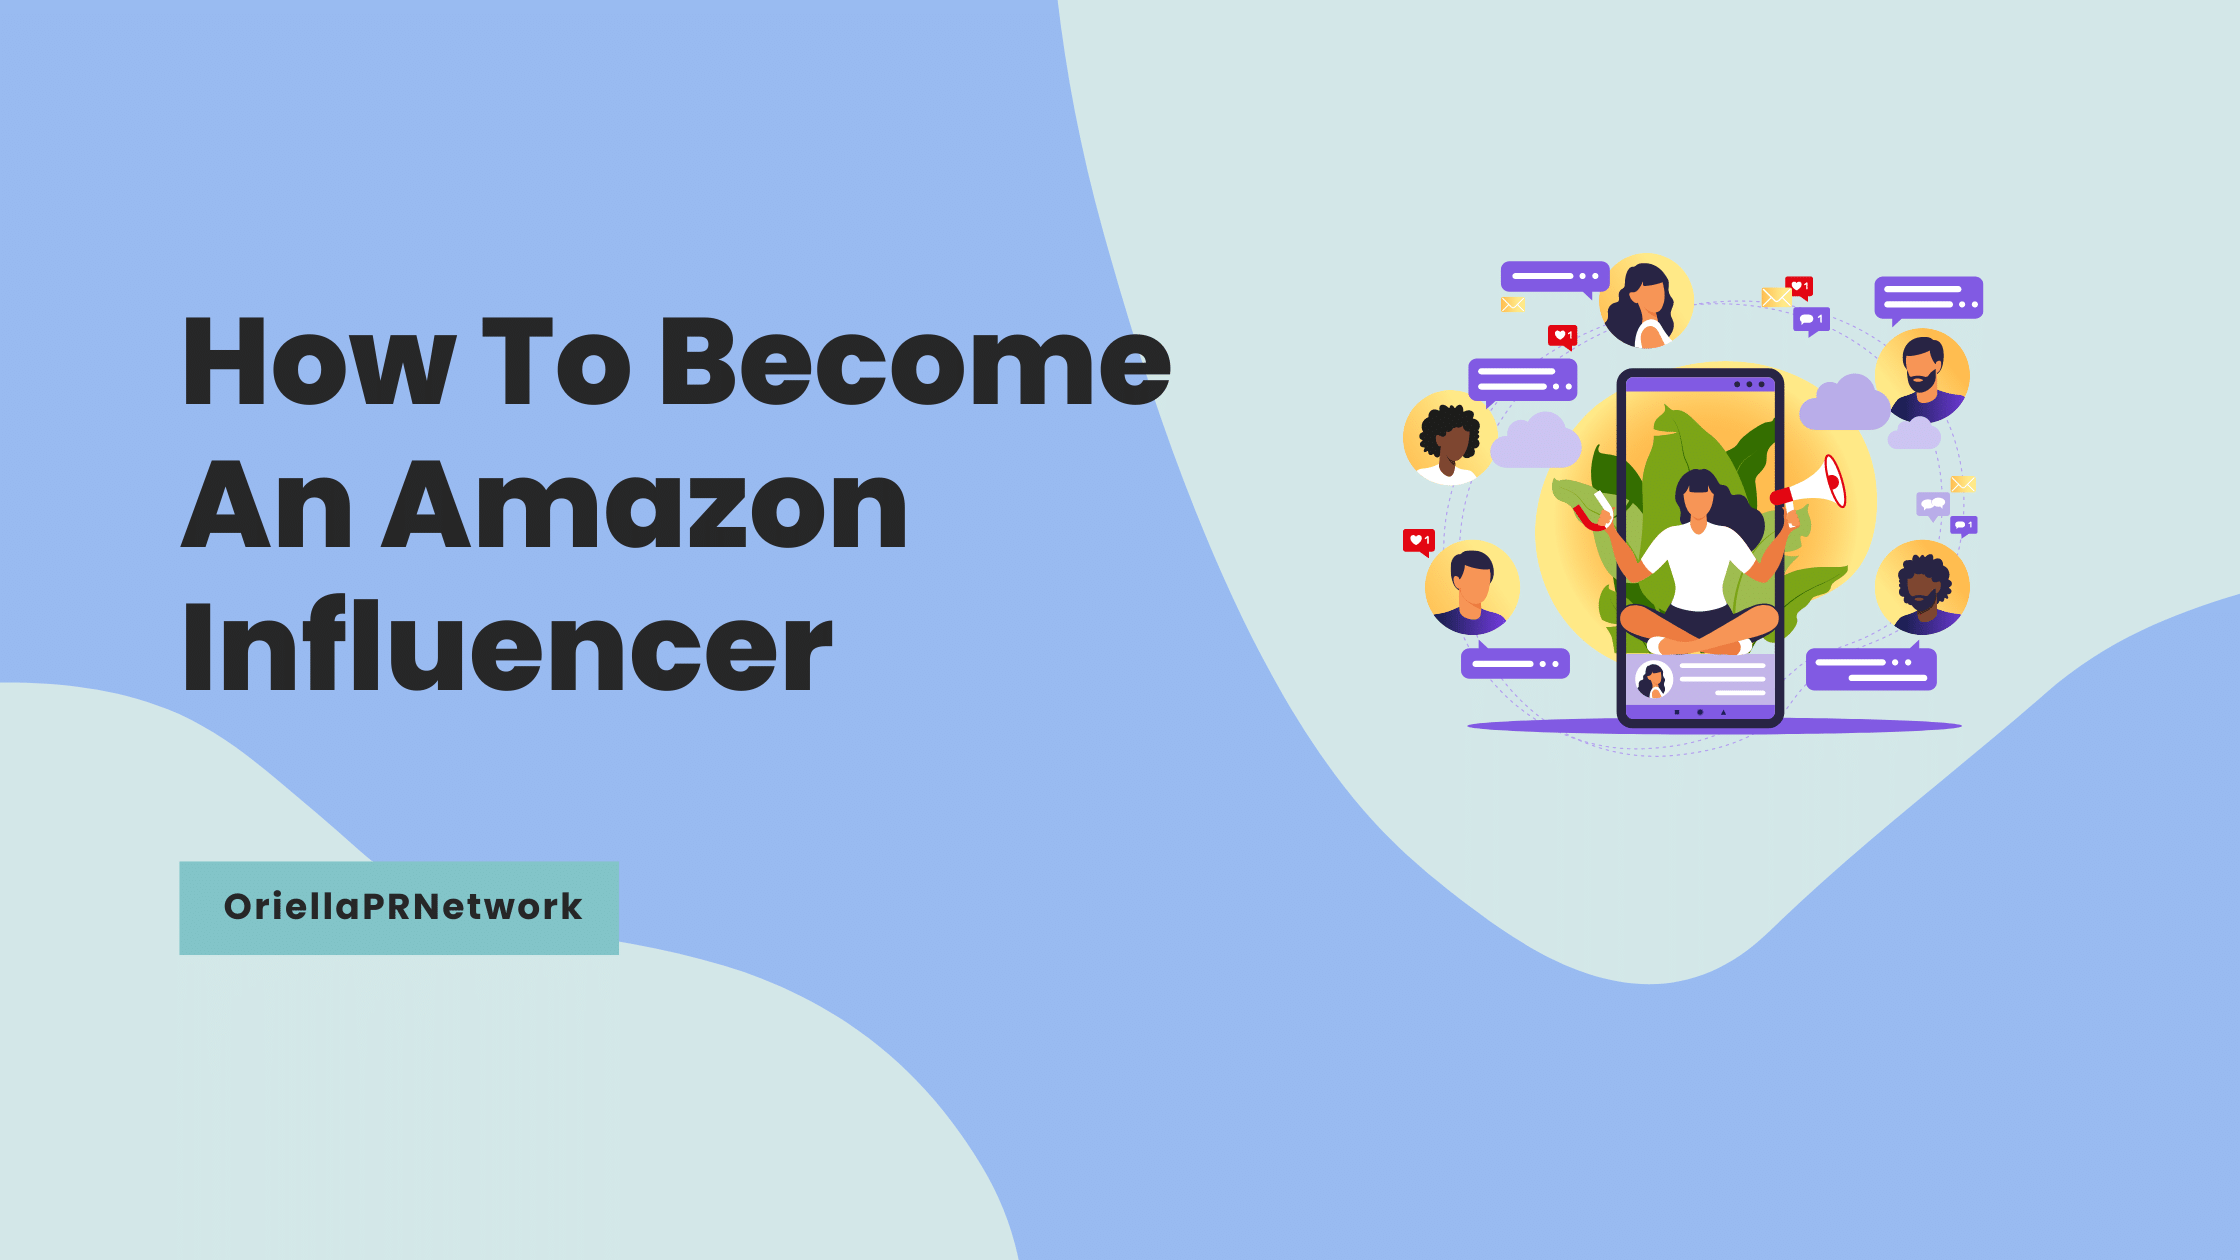 How To Become An Amazon Influencer - OriellaPRNetwork